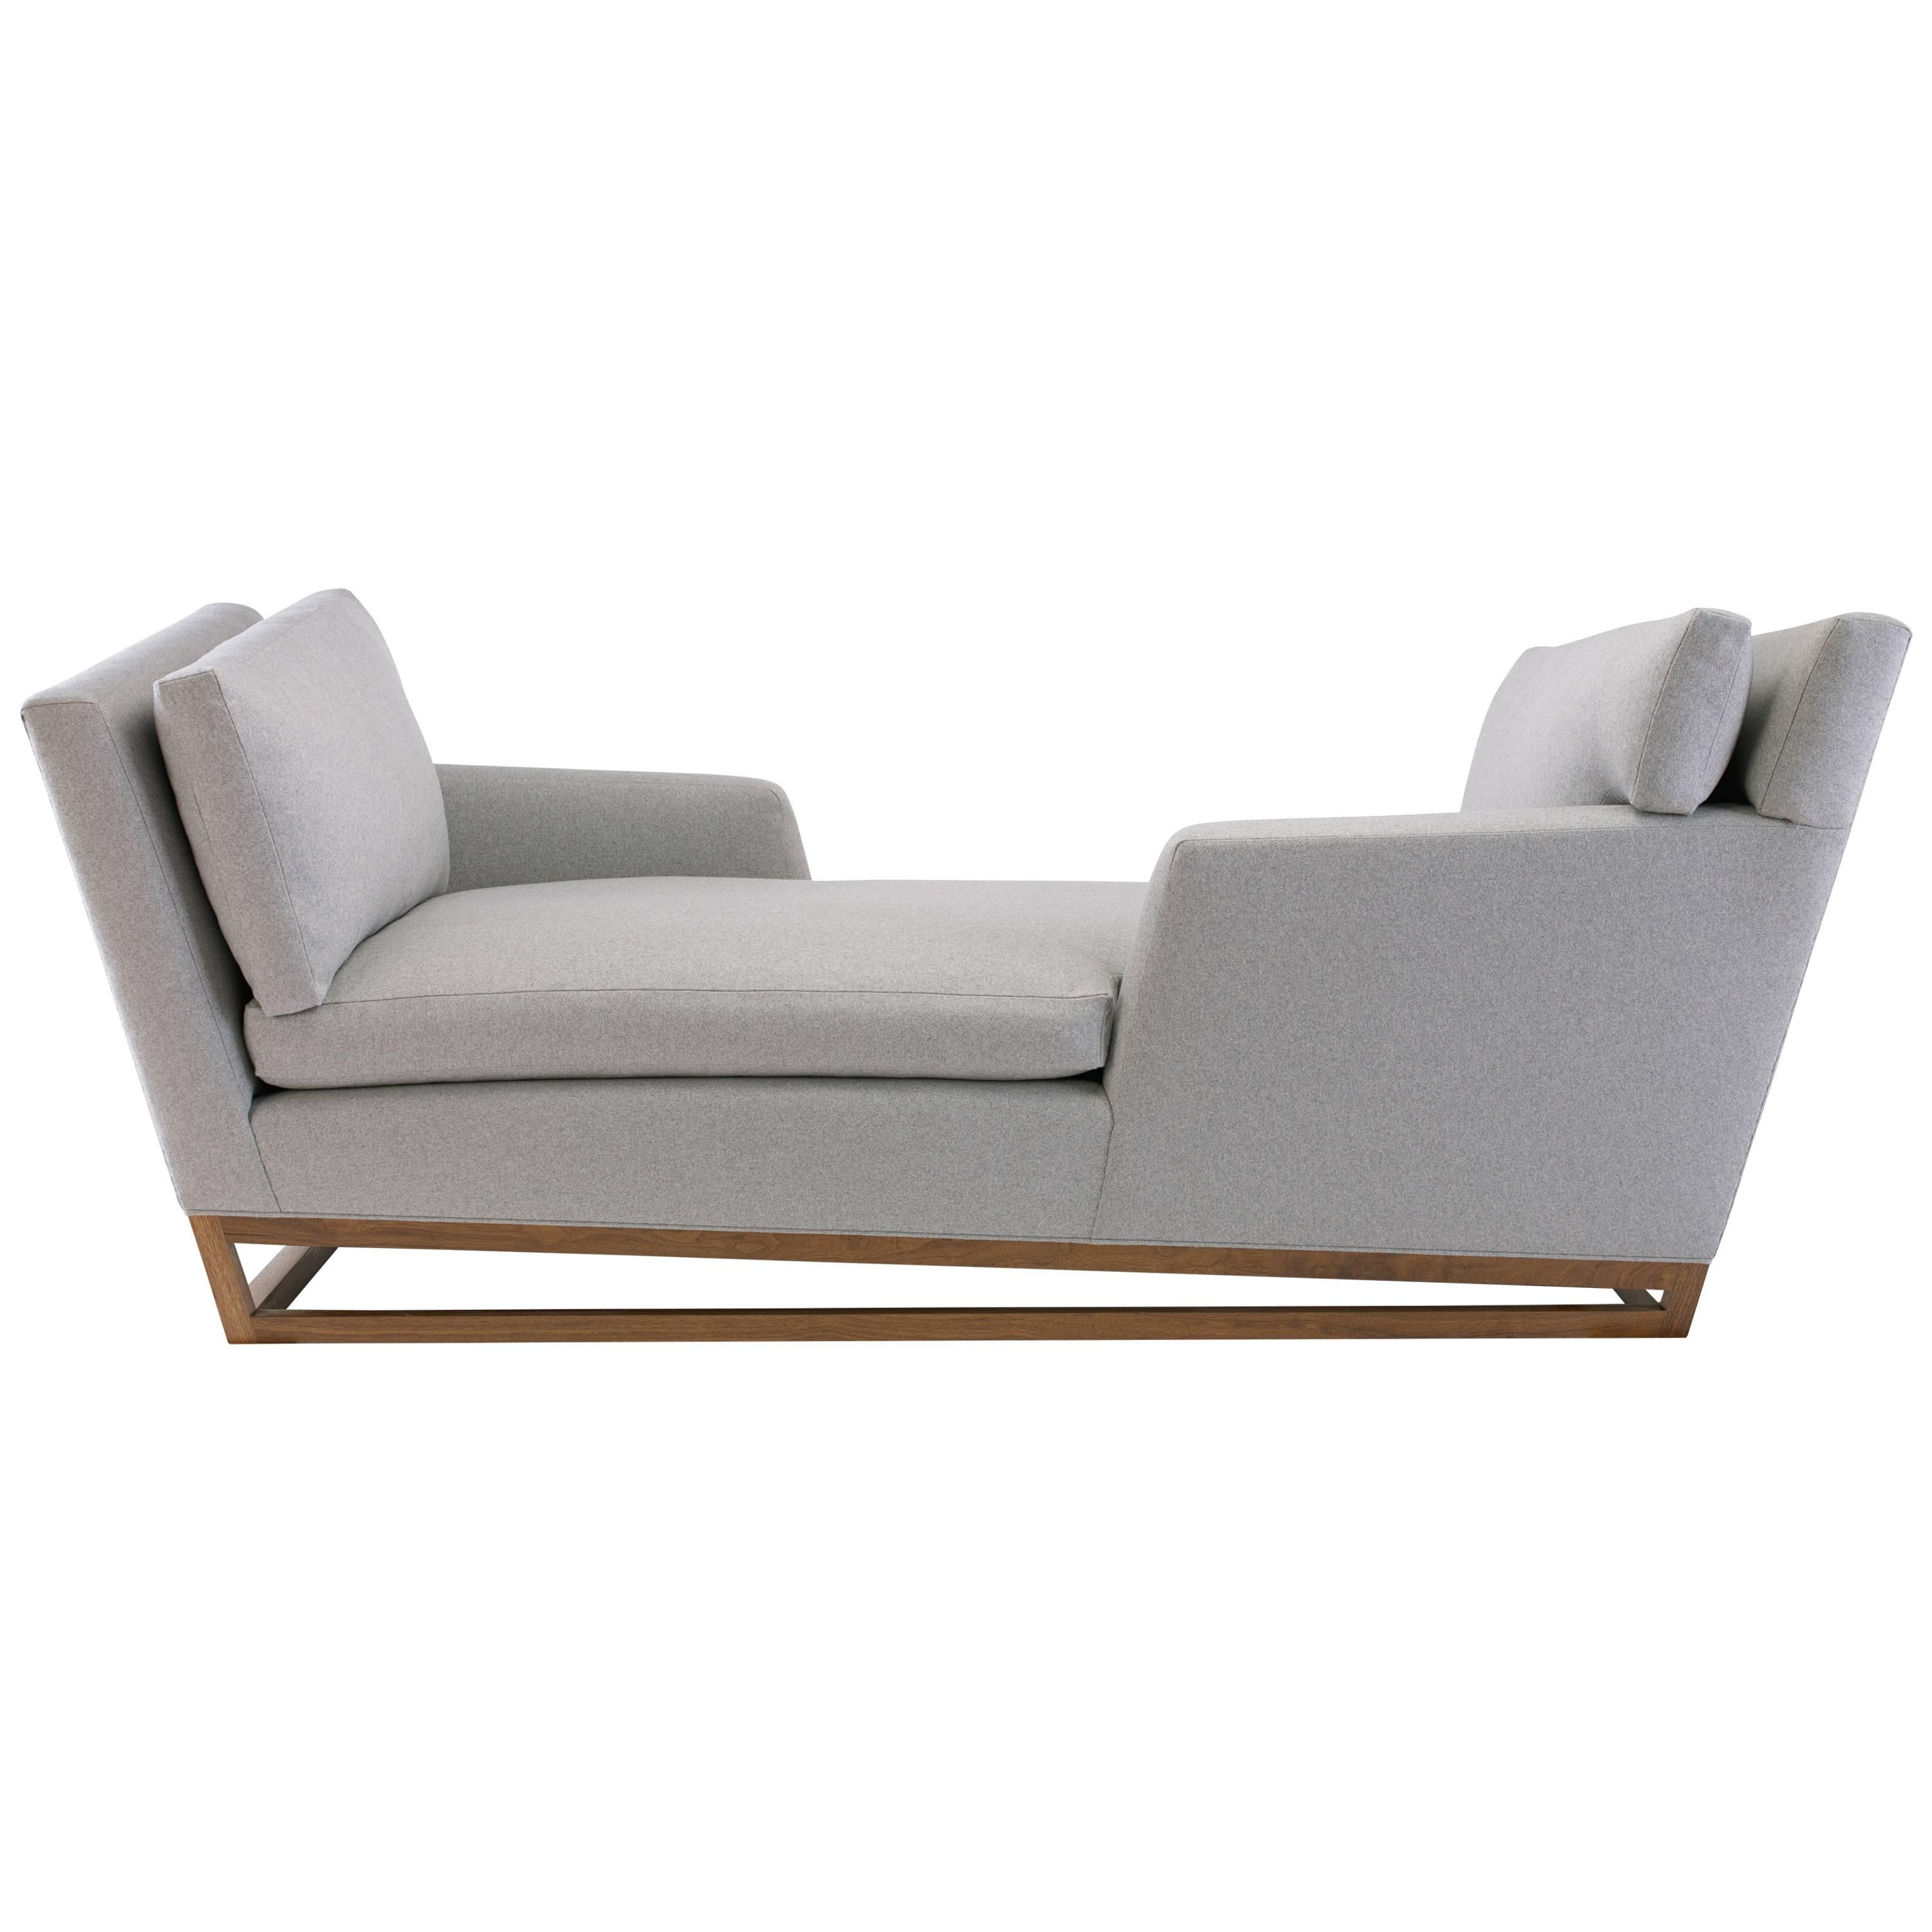 New Contemporary/Modern Handmade Tete-a-tete Sofa, Wool Fabric with Walnut Base For Sale